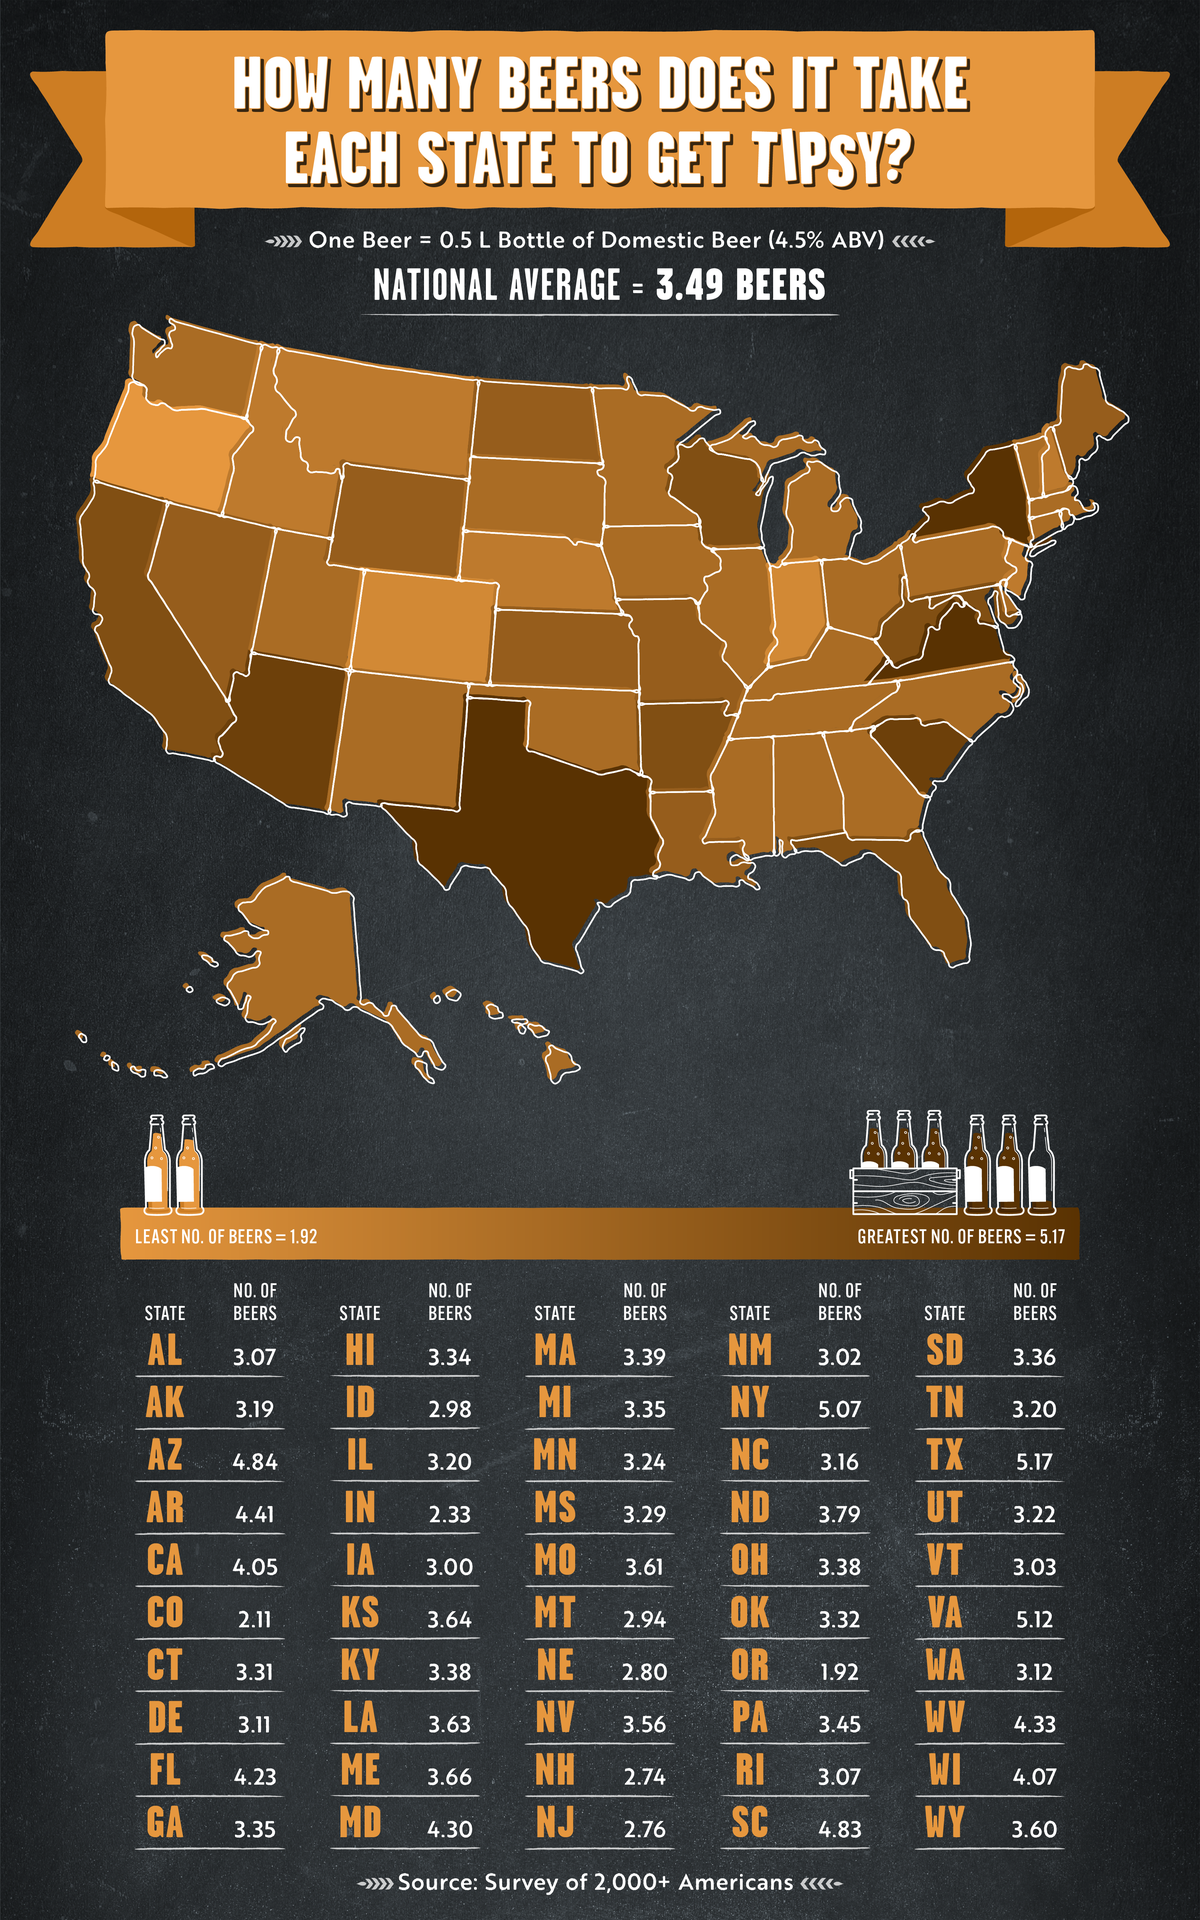 How many beers does it take each state to get tipsy map